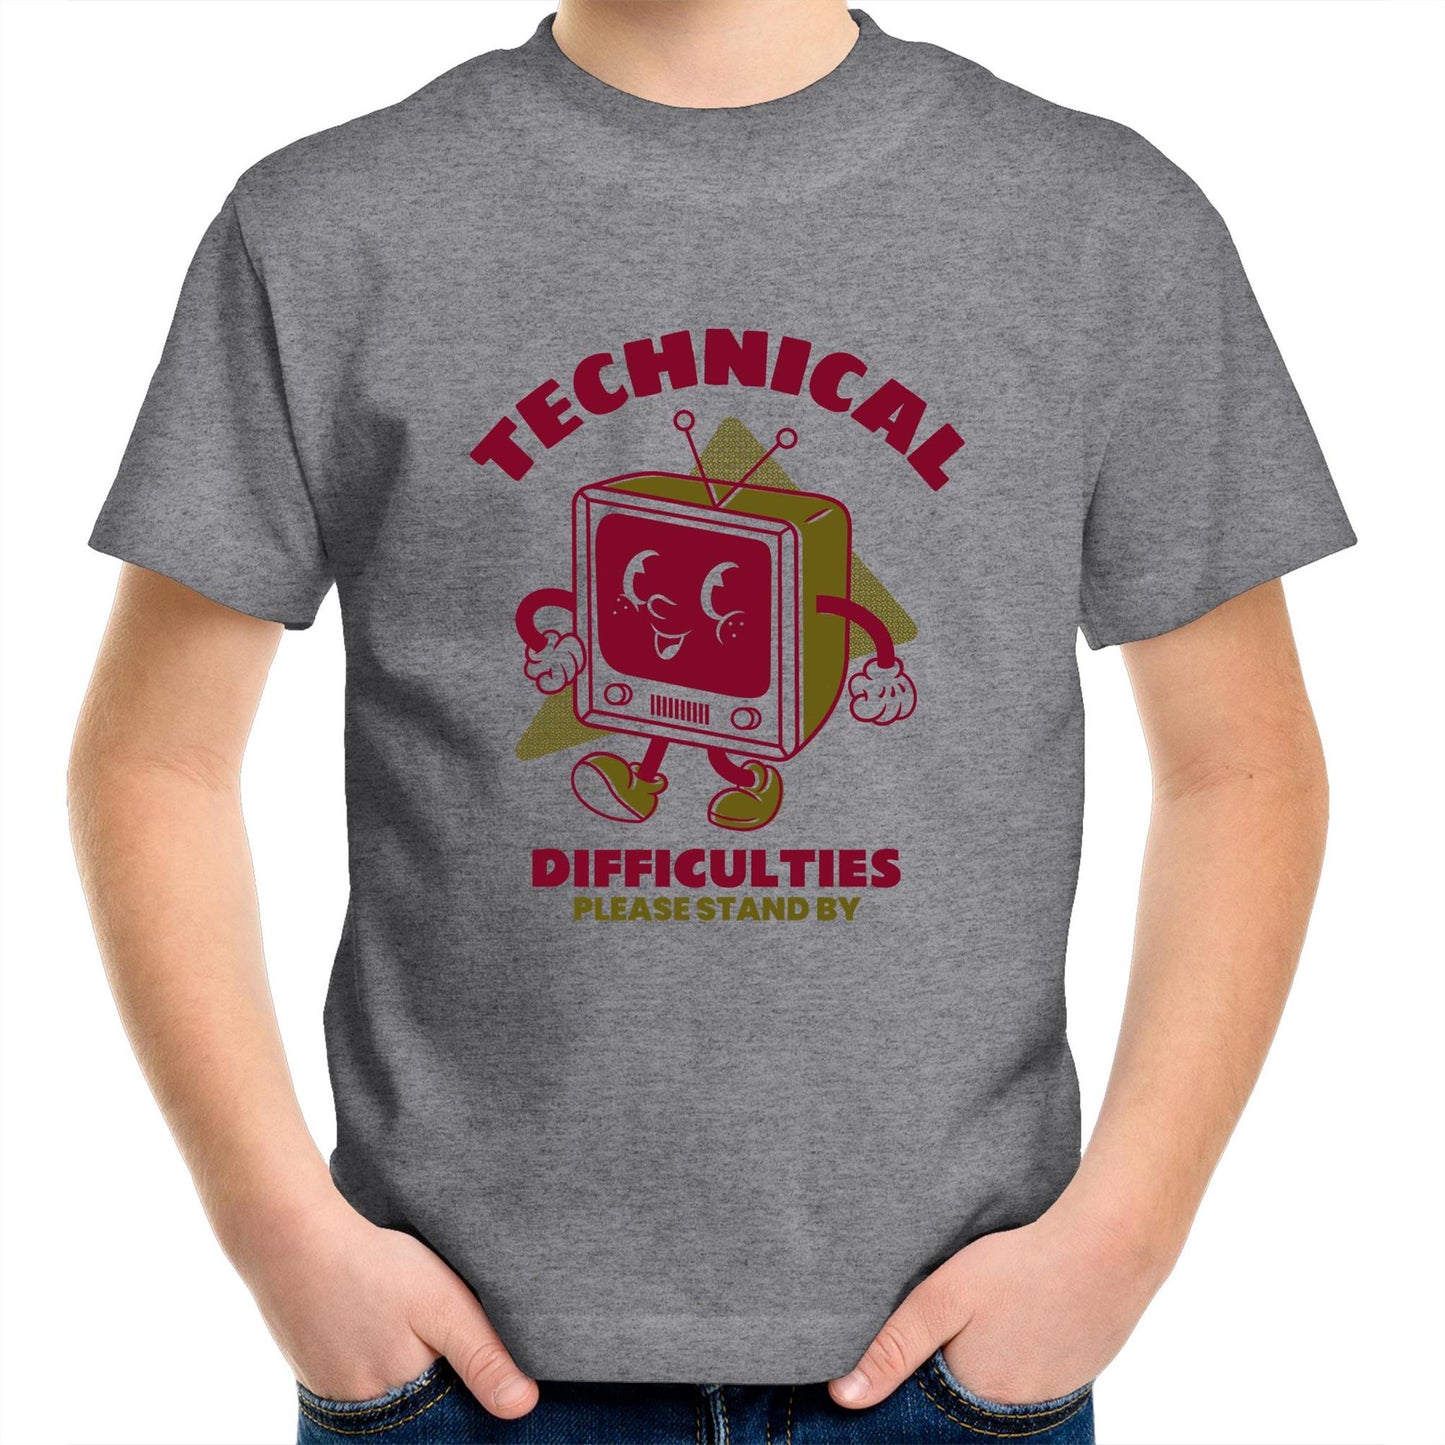 Retro TV Technical Difficulties - Kids Youth Crew T-Shirt Grey Marle Kids Youth T-shirt Retro Tech